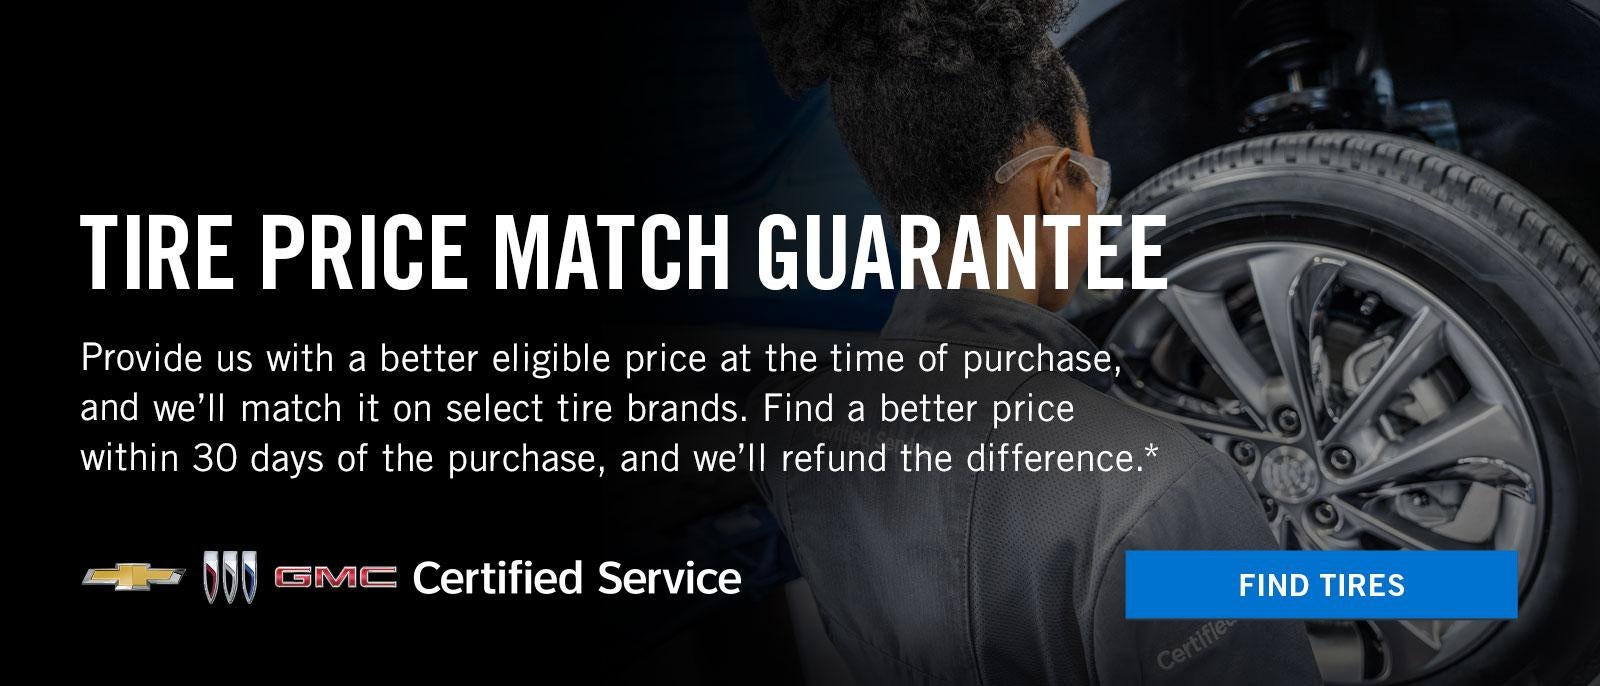 Tire Price Match Guarantee at Lipscomb Chevrolet Buick GMC Bowie TX